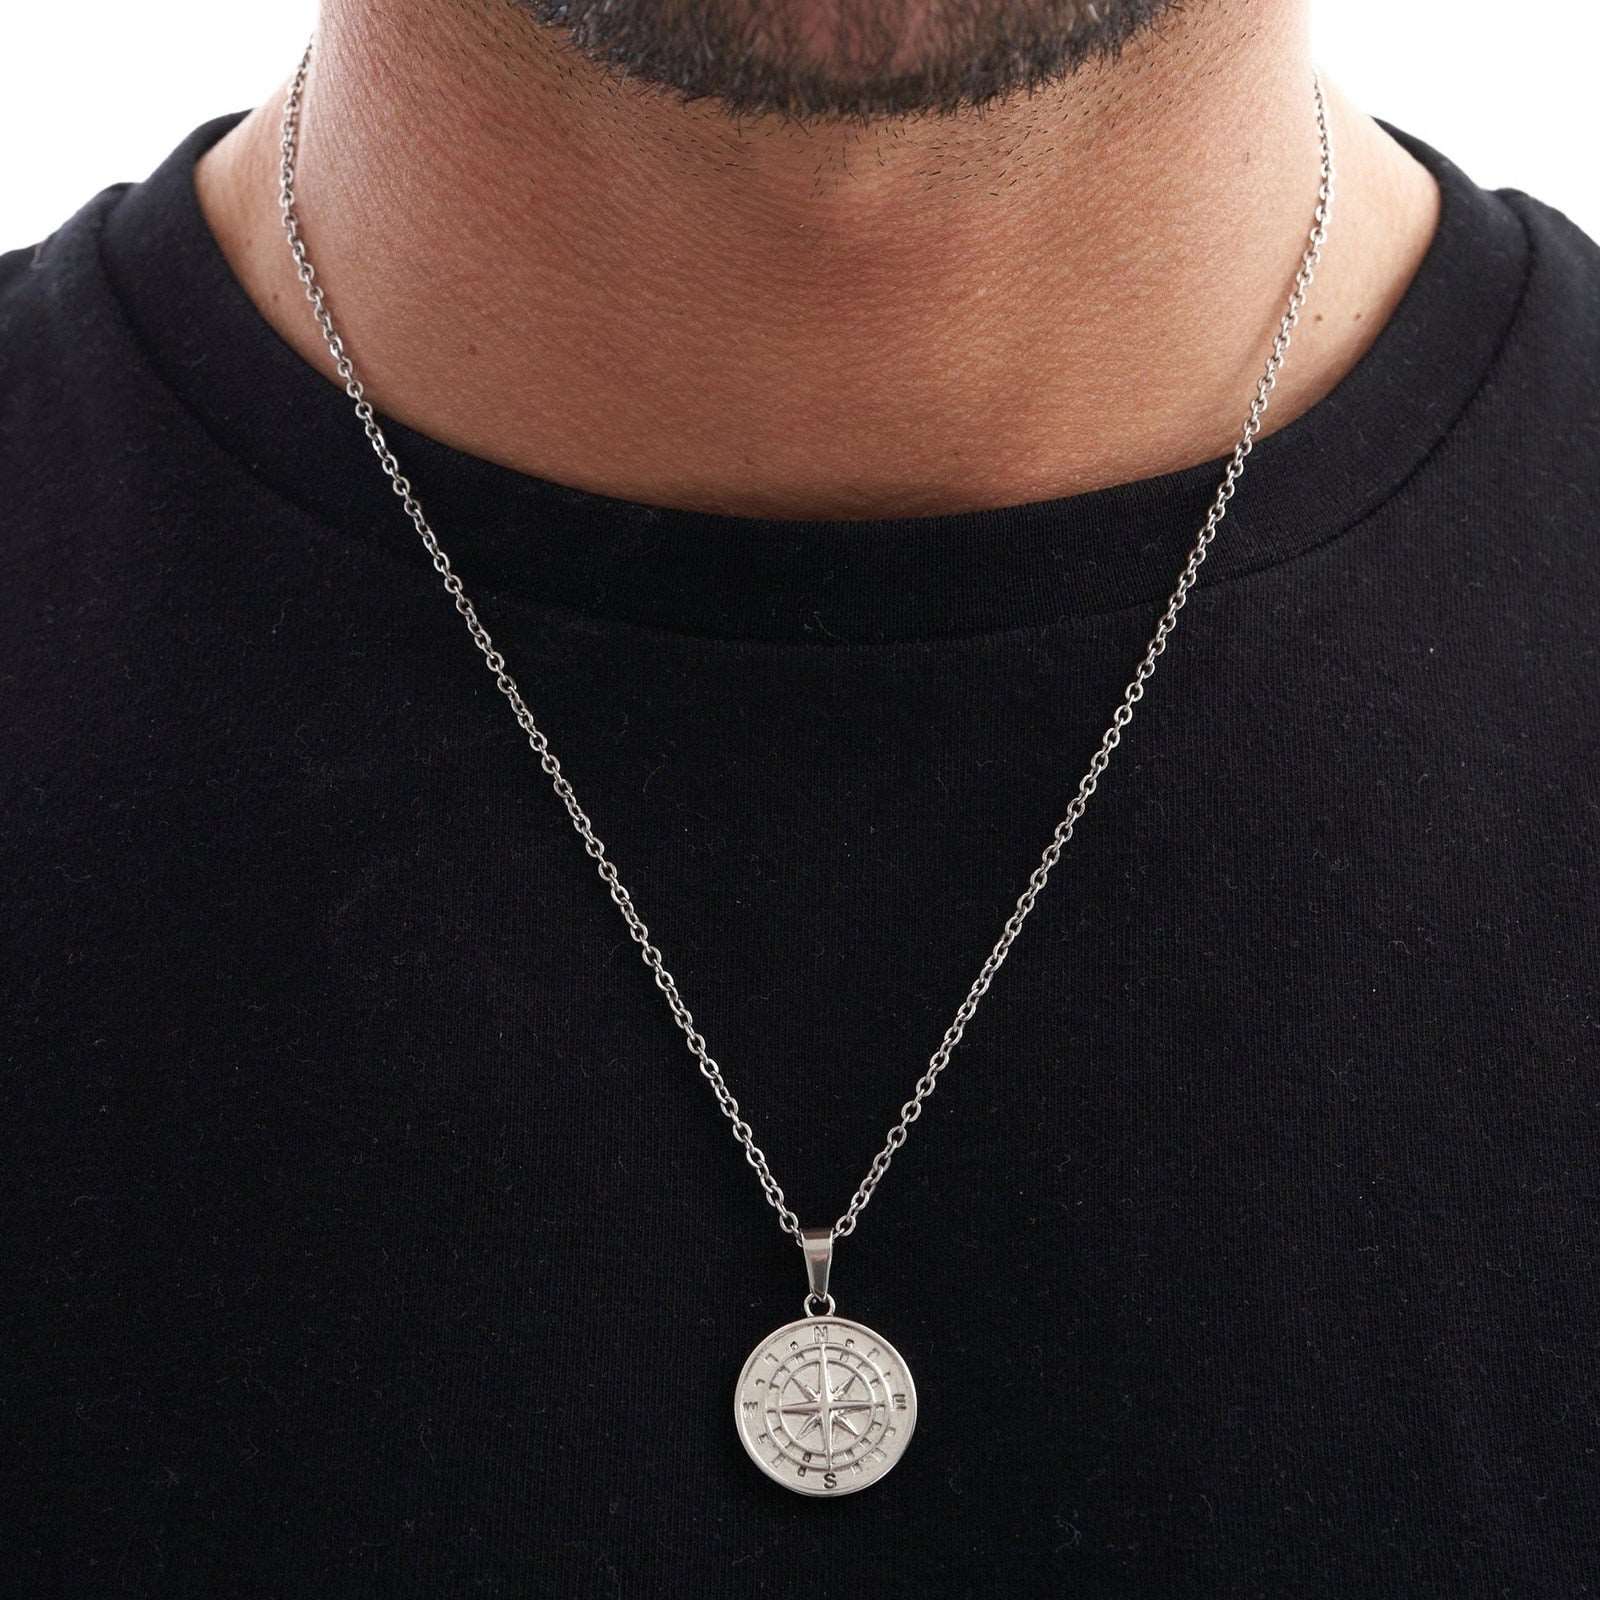 Layered Necklaces for Men, Sailing Travel Compass Pendant Silver Men's Necklace